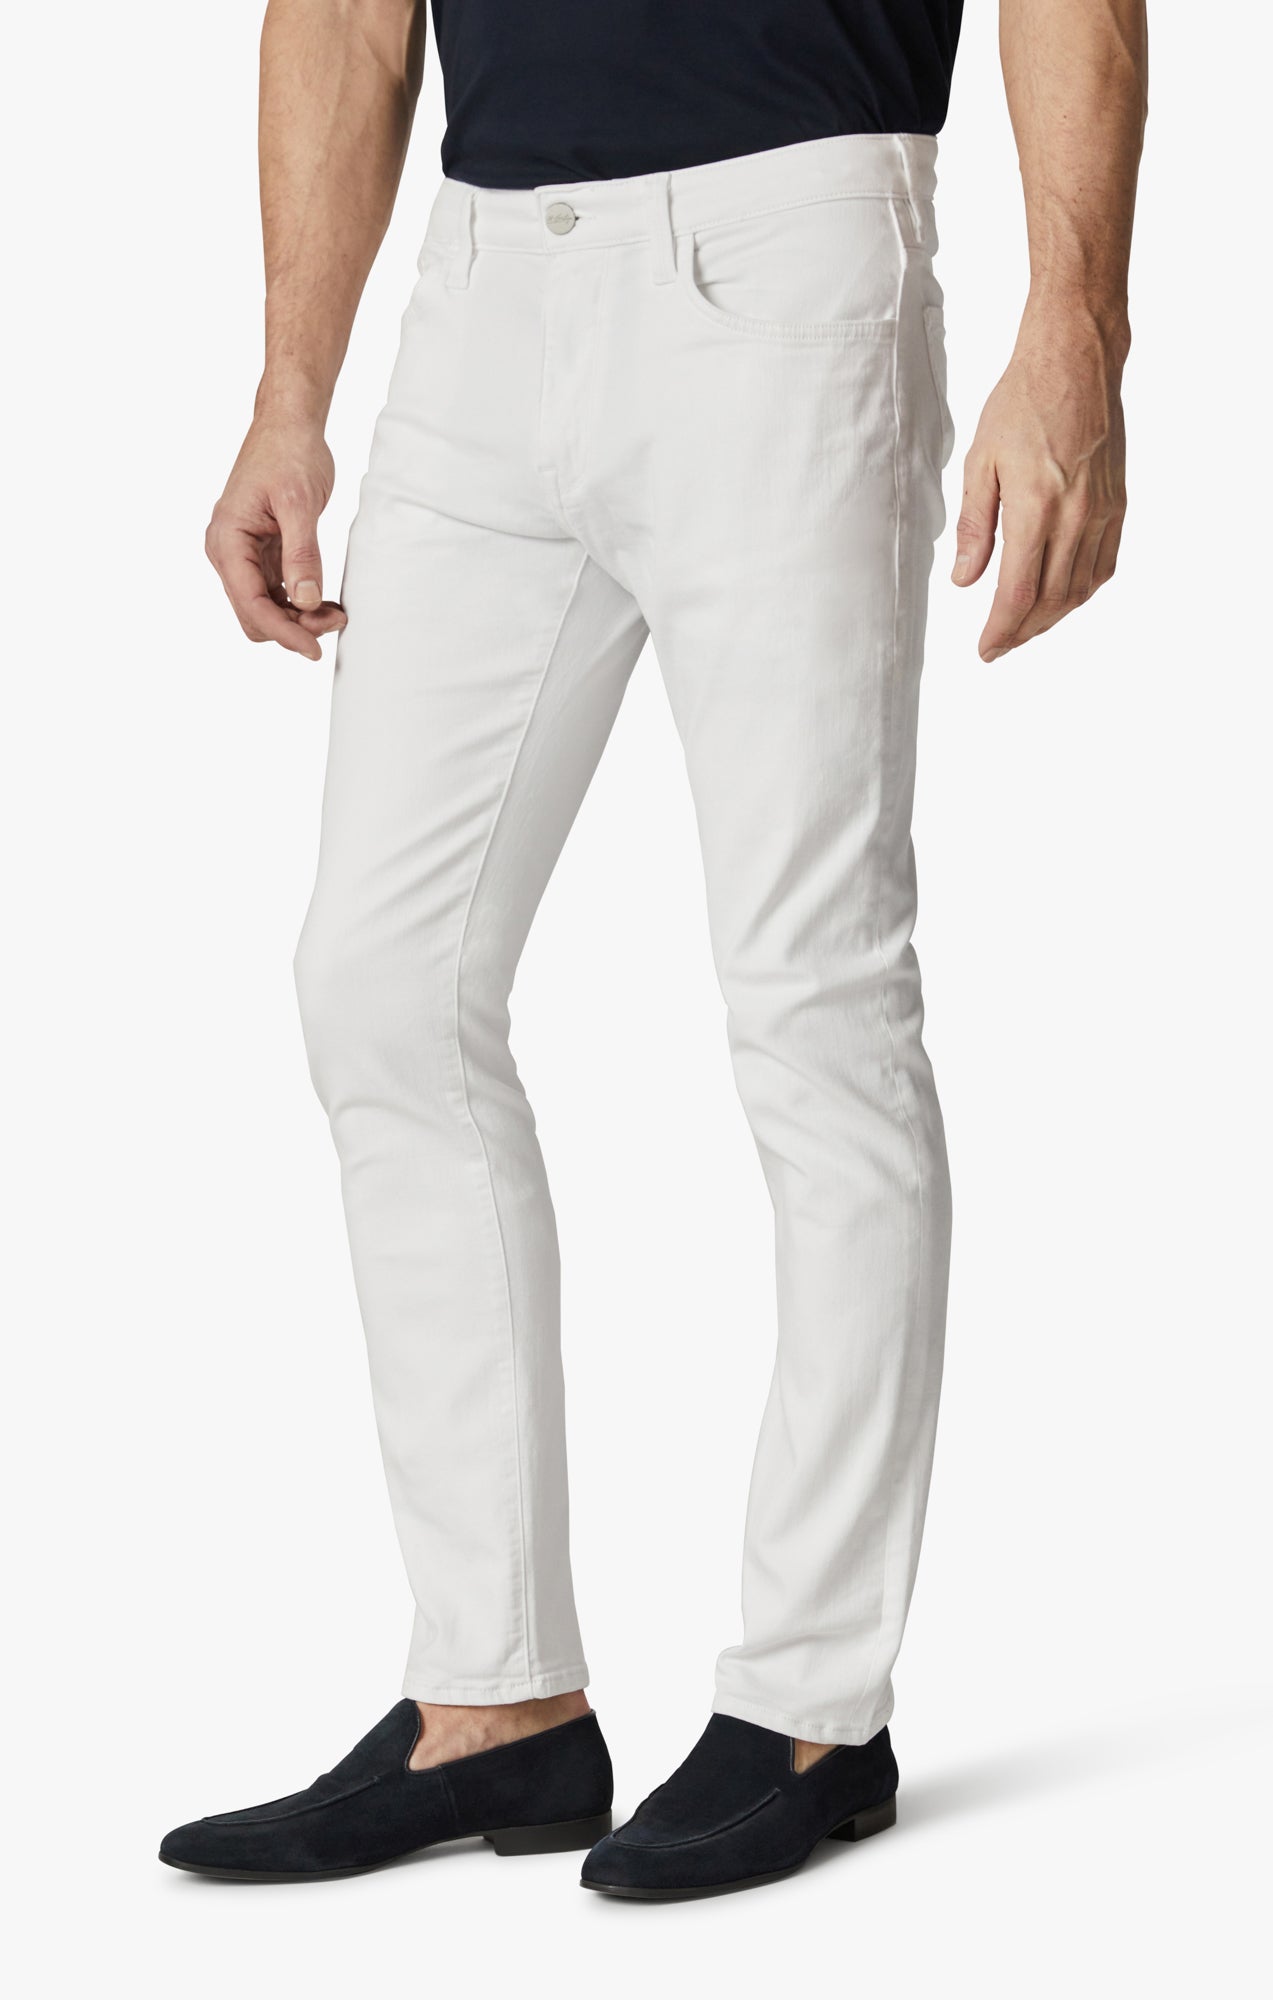 Cool Tapered Leg Pants In Double White Comfort